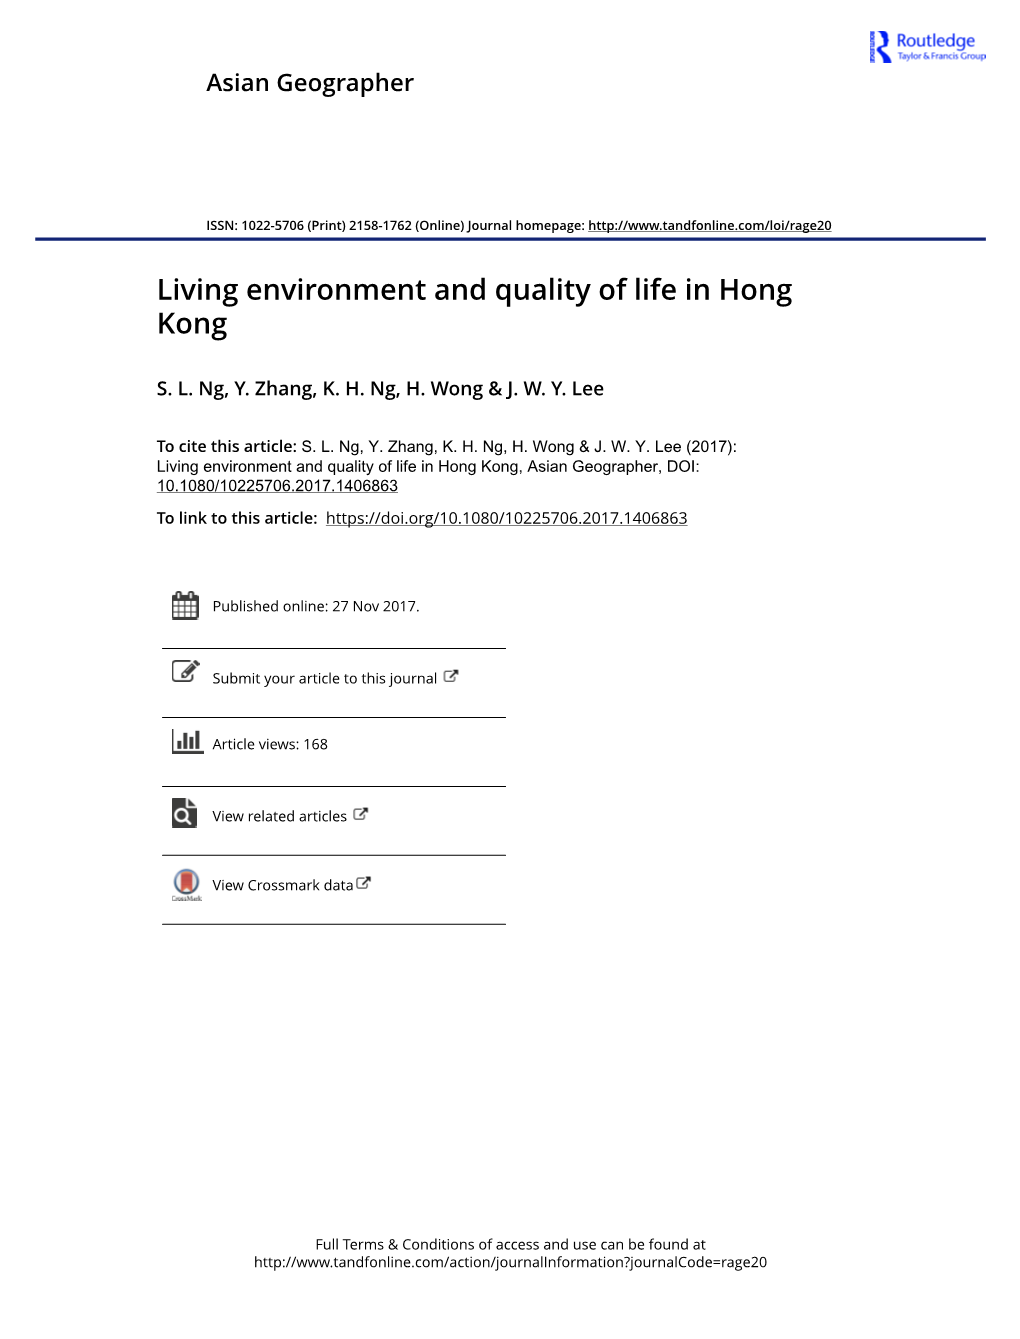 Living Environment and Quality of Life in Hong Kong